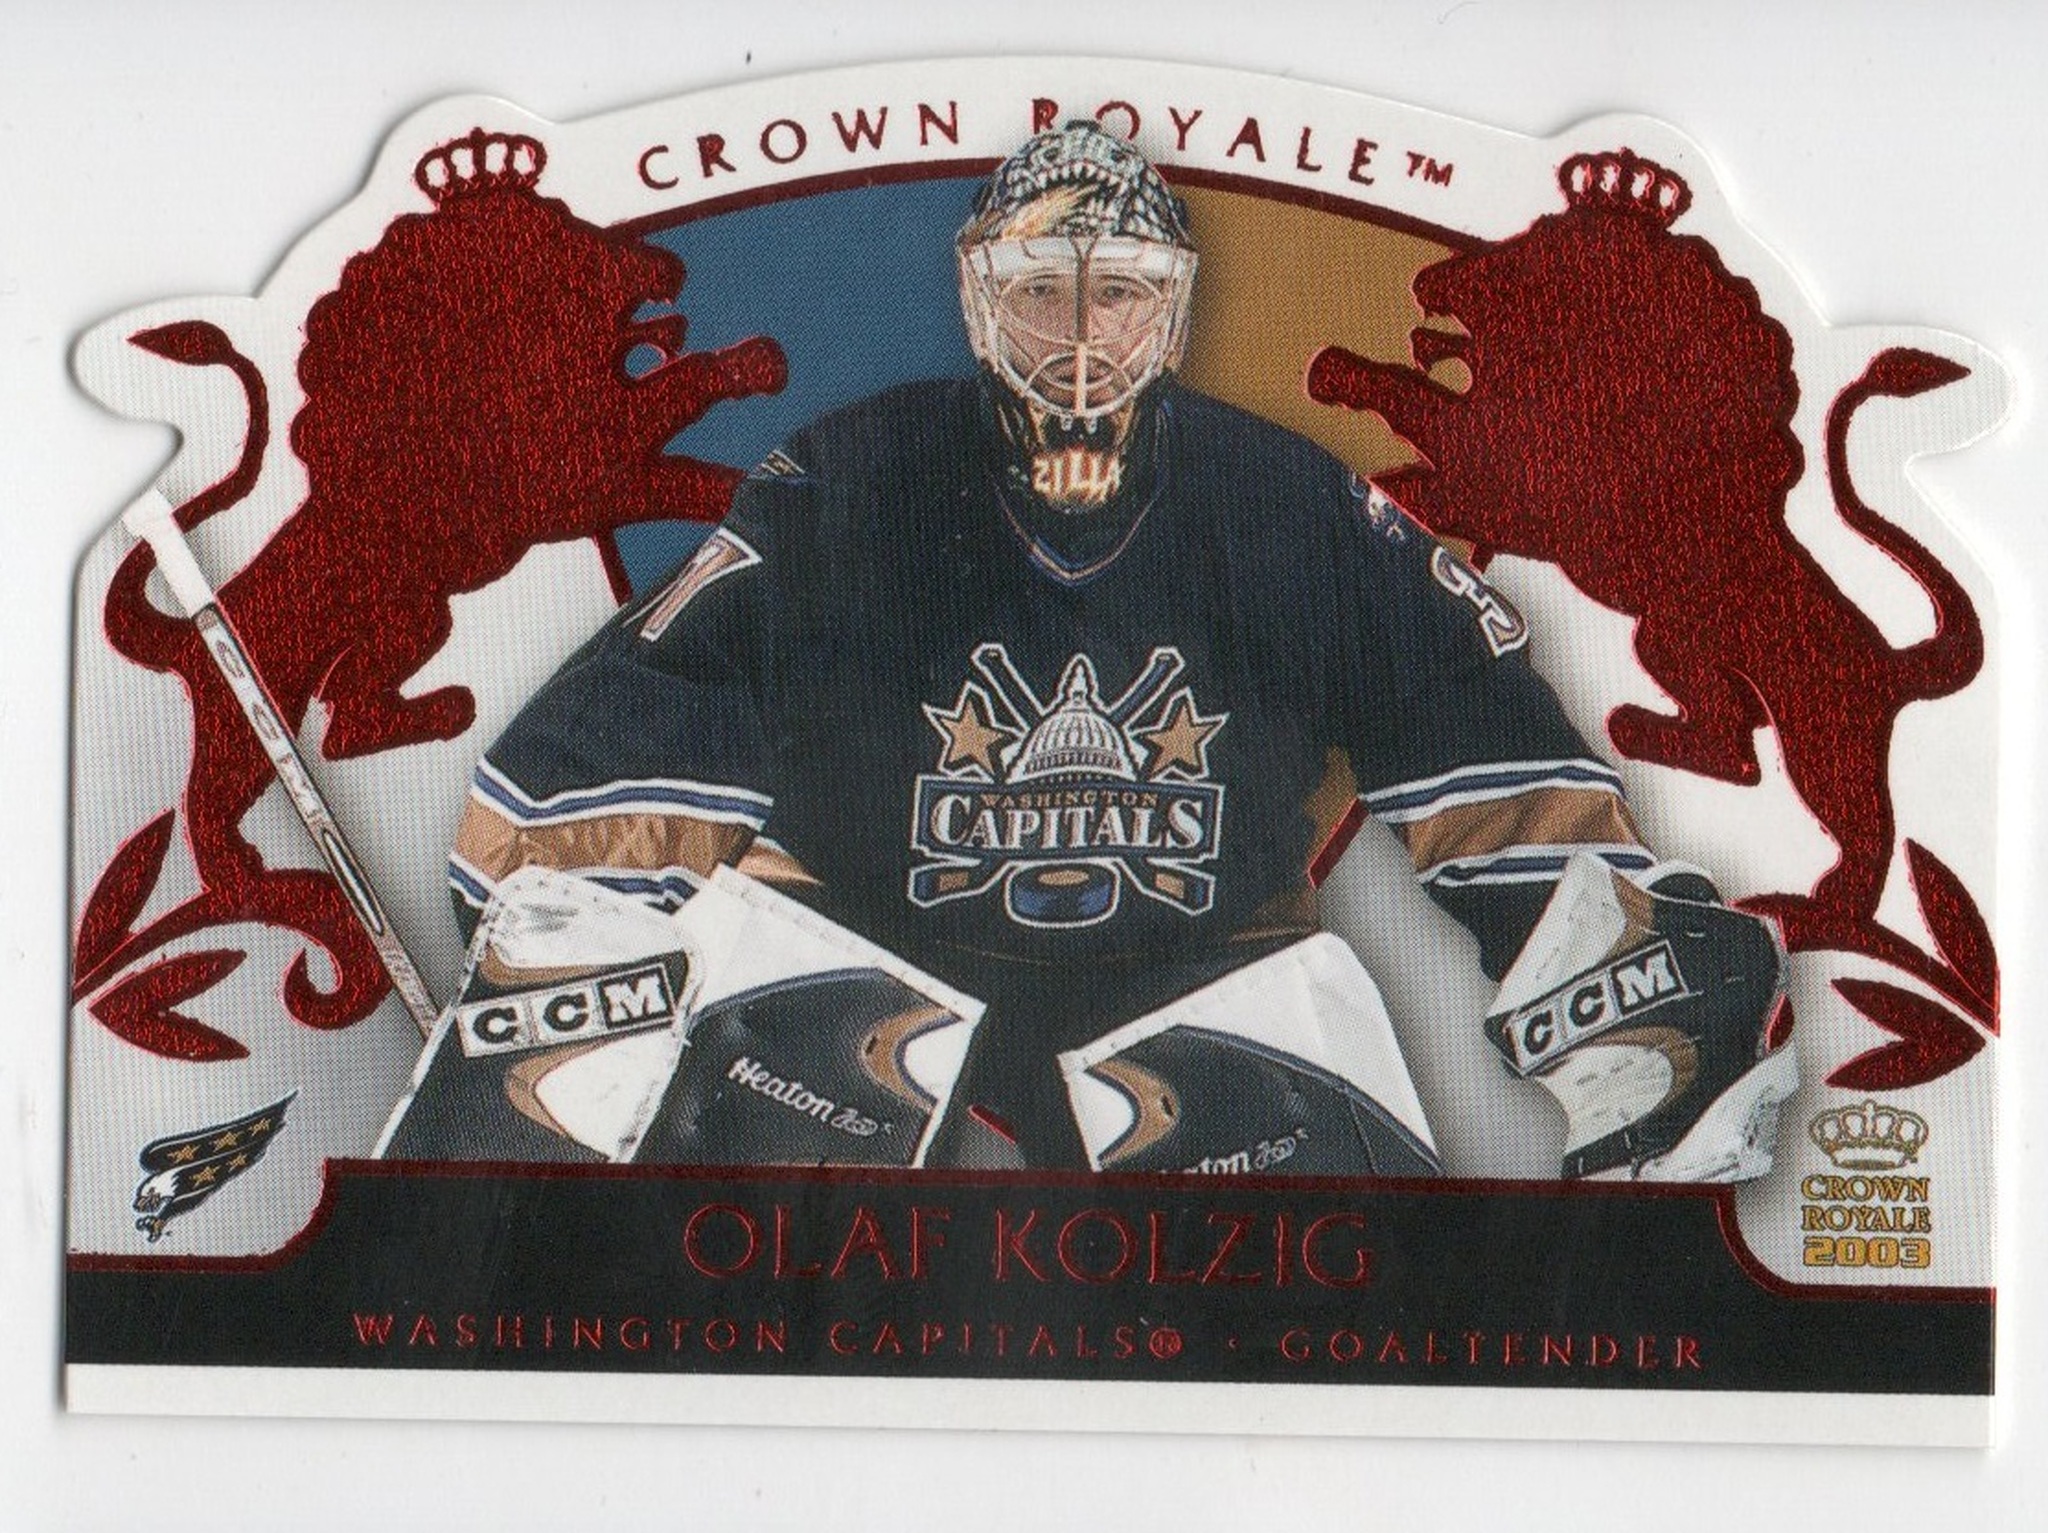 2002-03 Crown Royale Red #100 Olaf Kolzig (15-X144-CAPITALS)